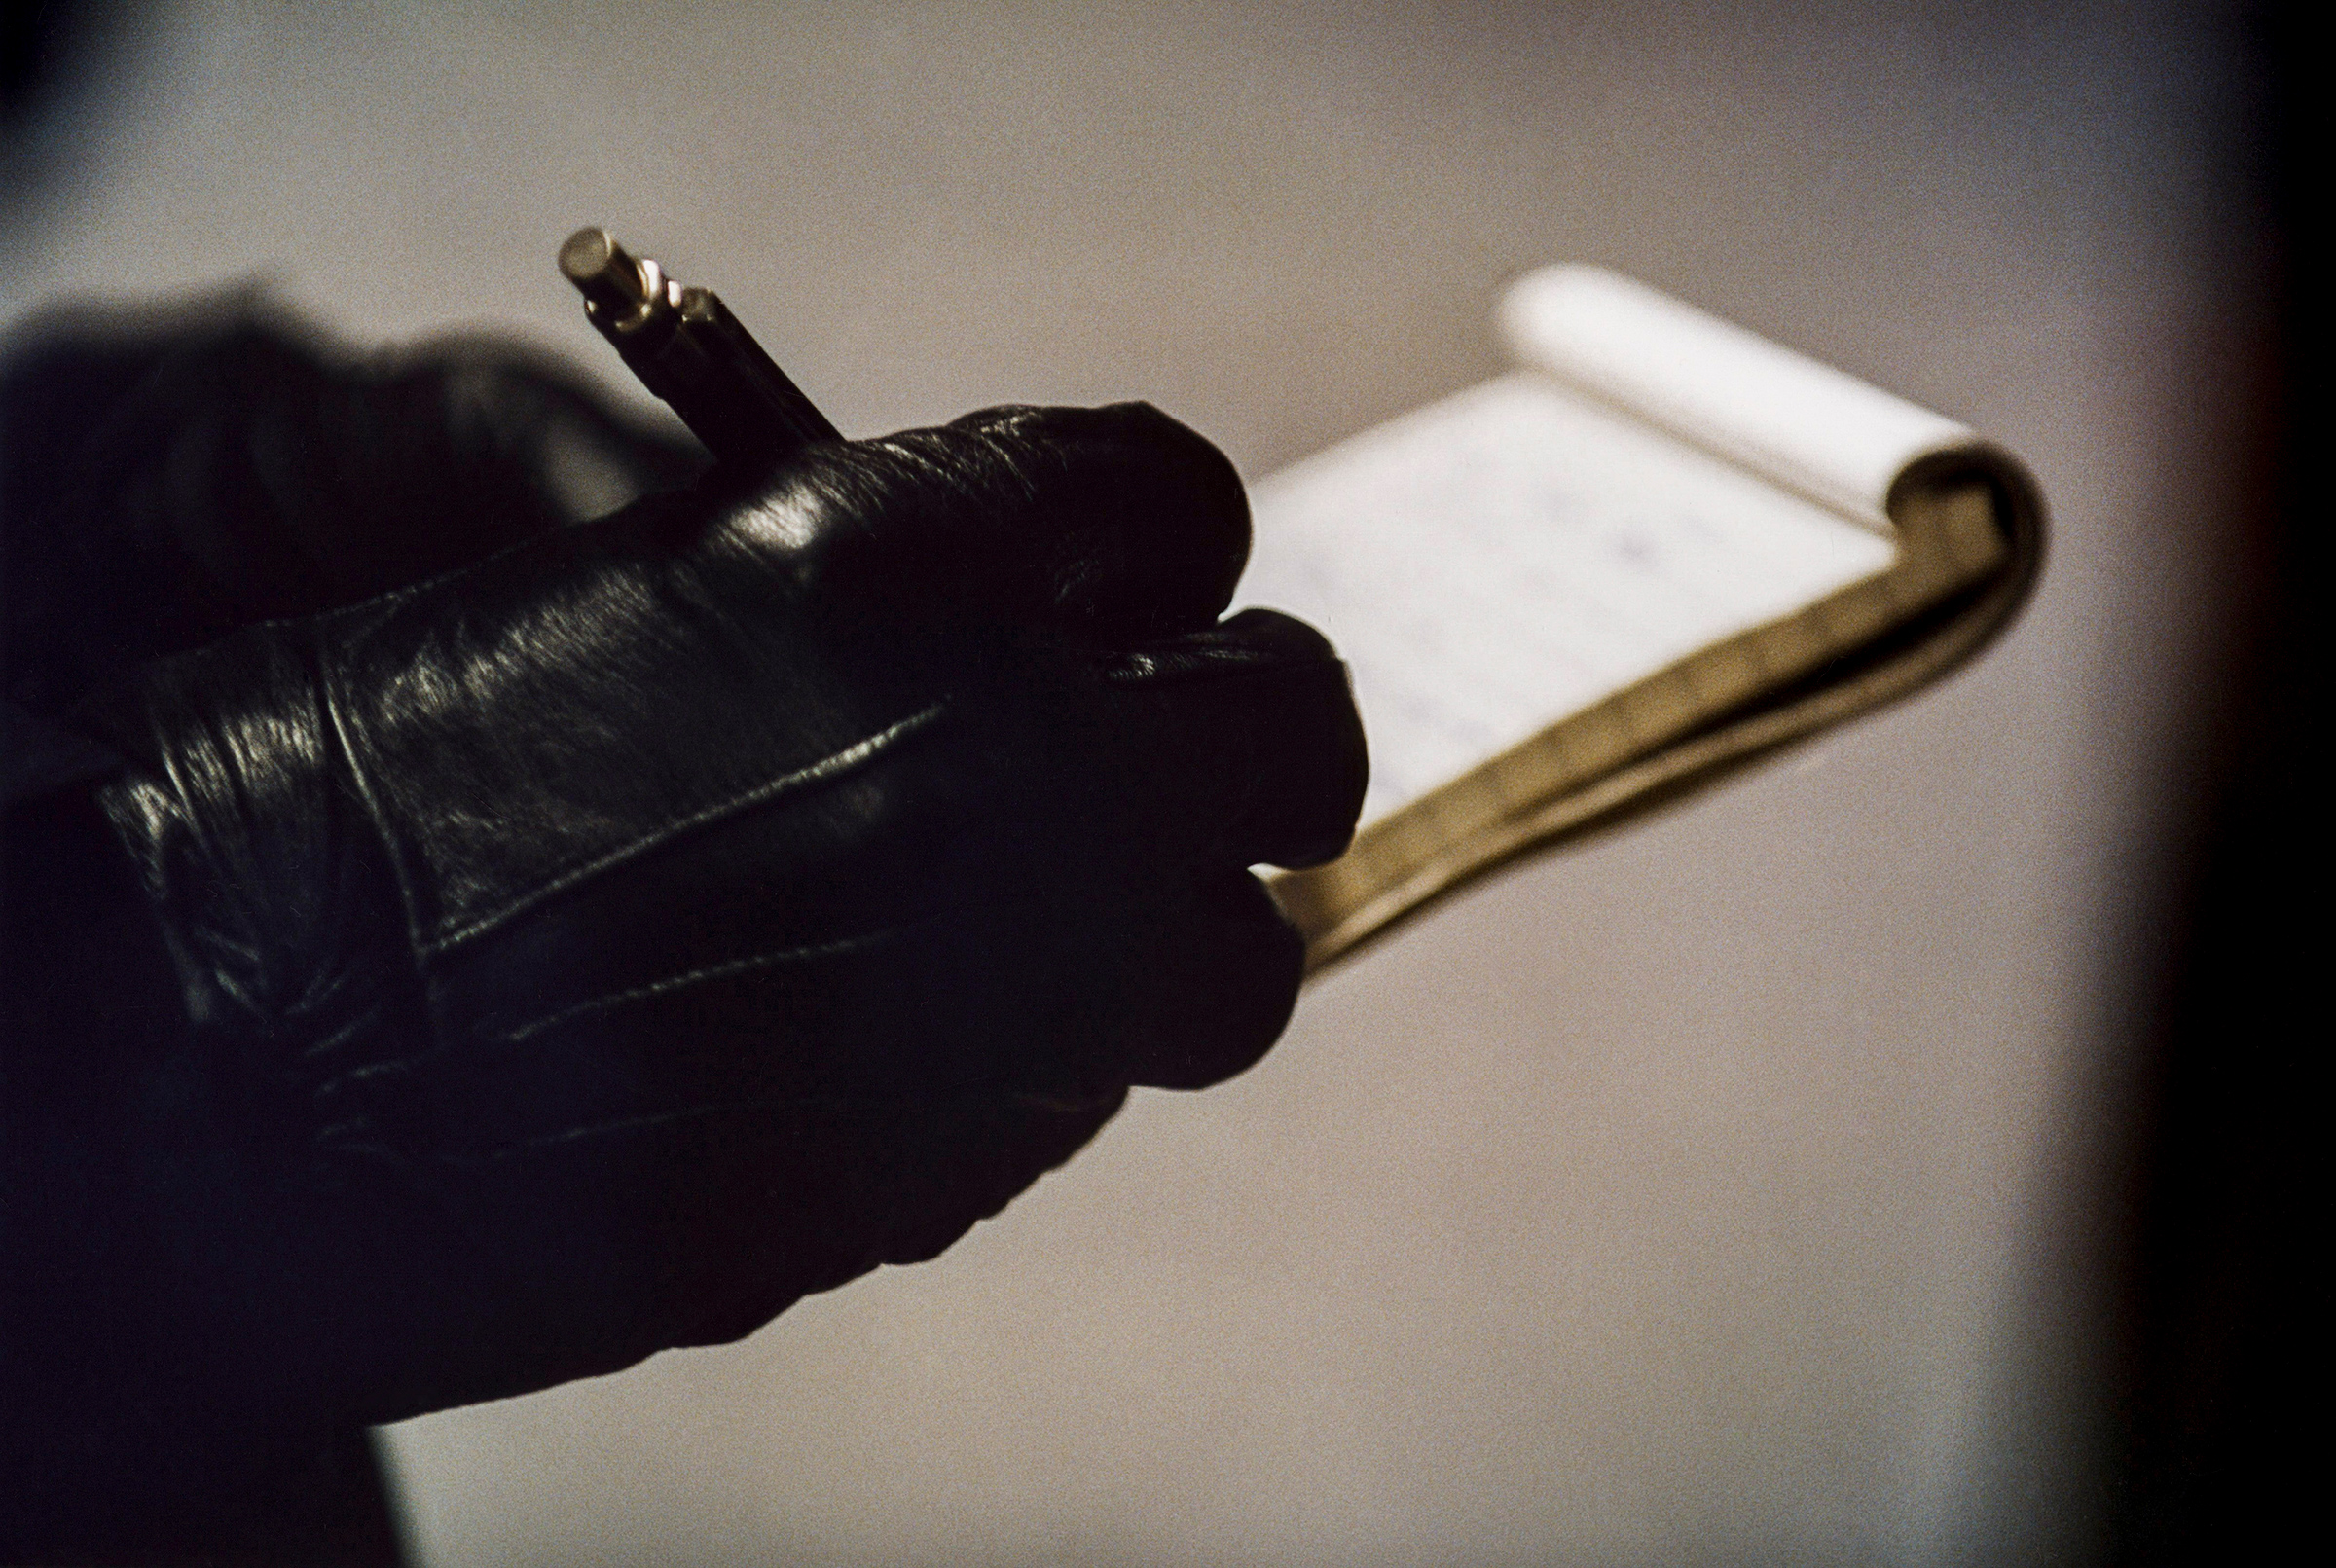 A police officer's hand in gloves write on a notepad.